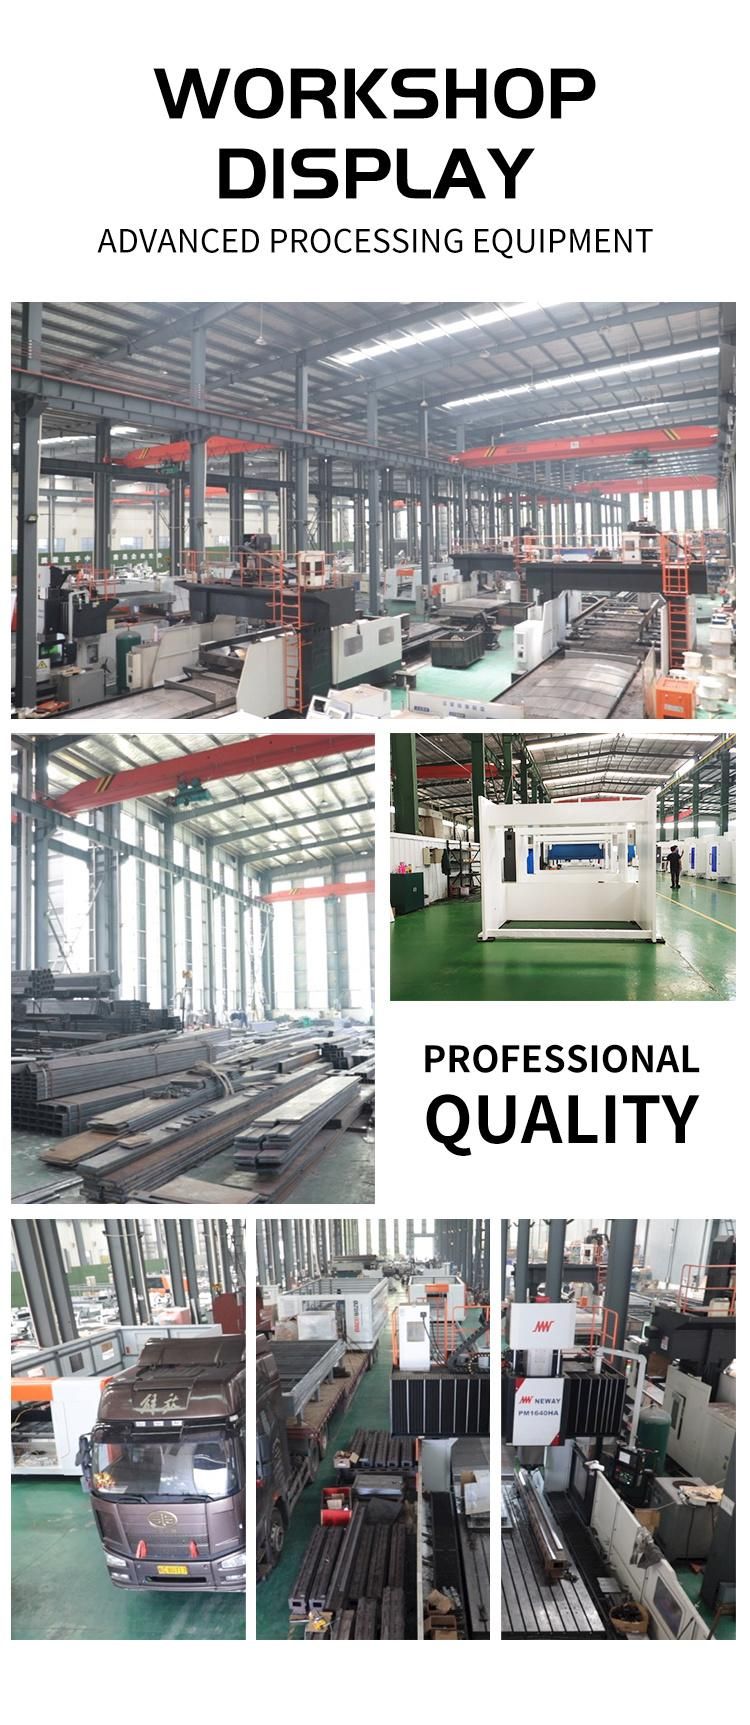 Njwg 500tons Automatic CNC Hydraulic Stainless Steel Plate Bending Machine for Metal Folding